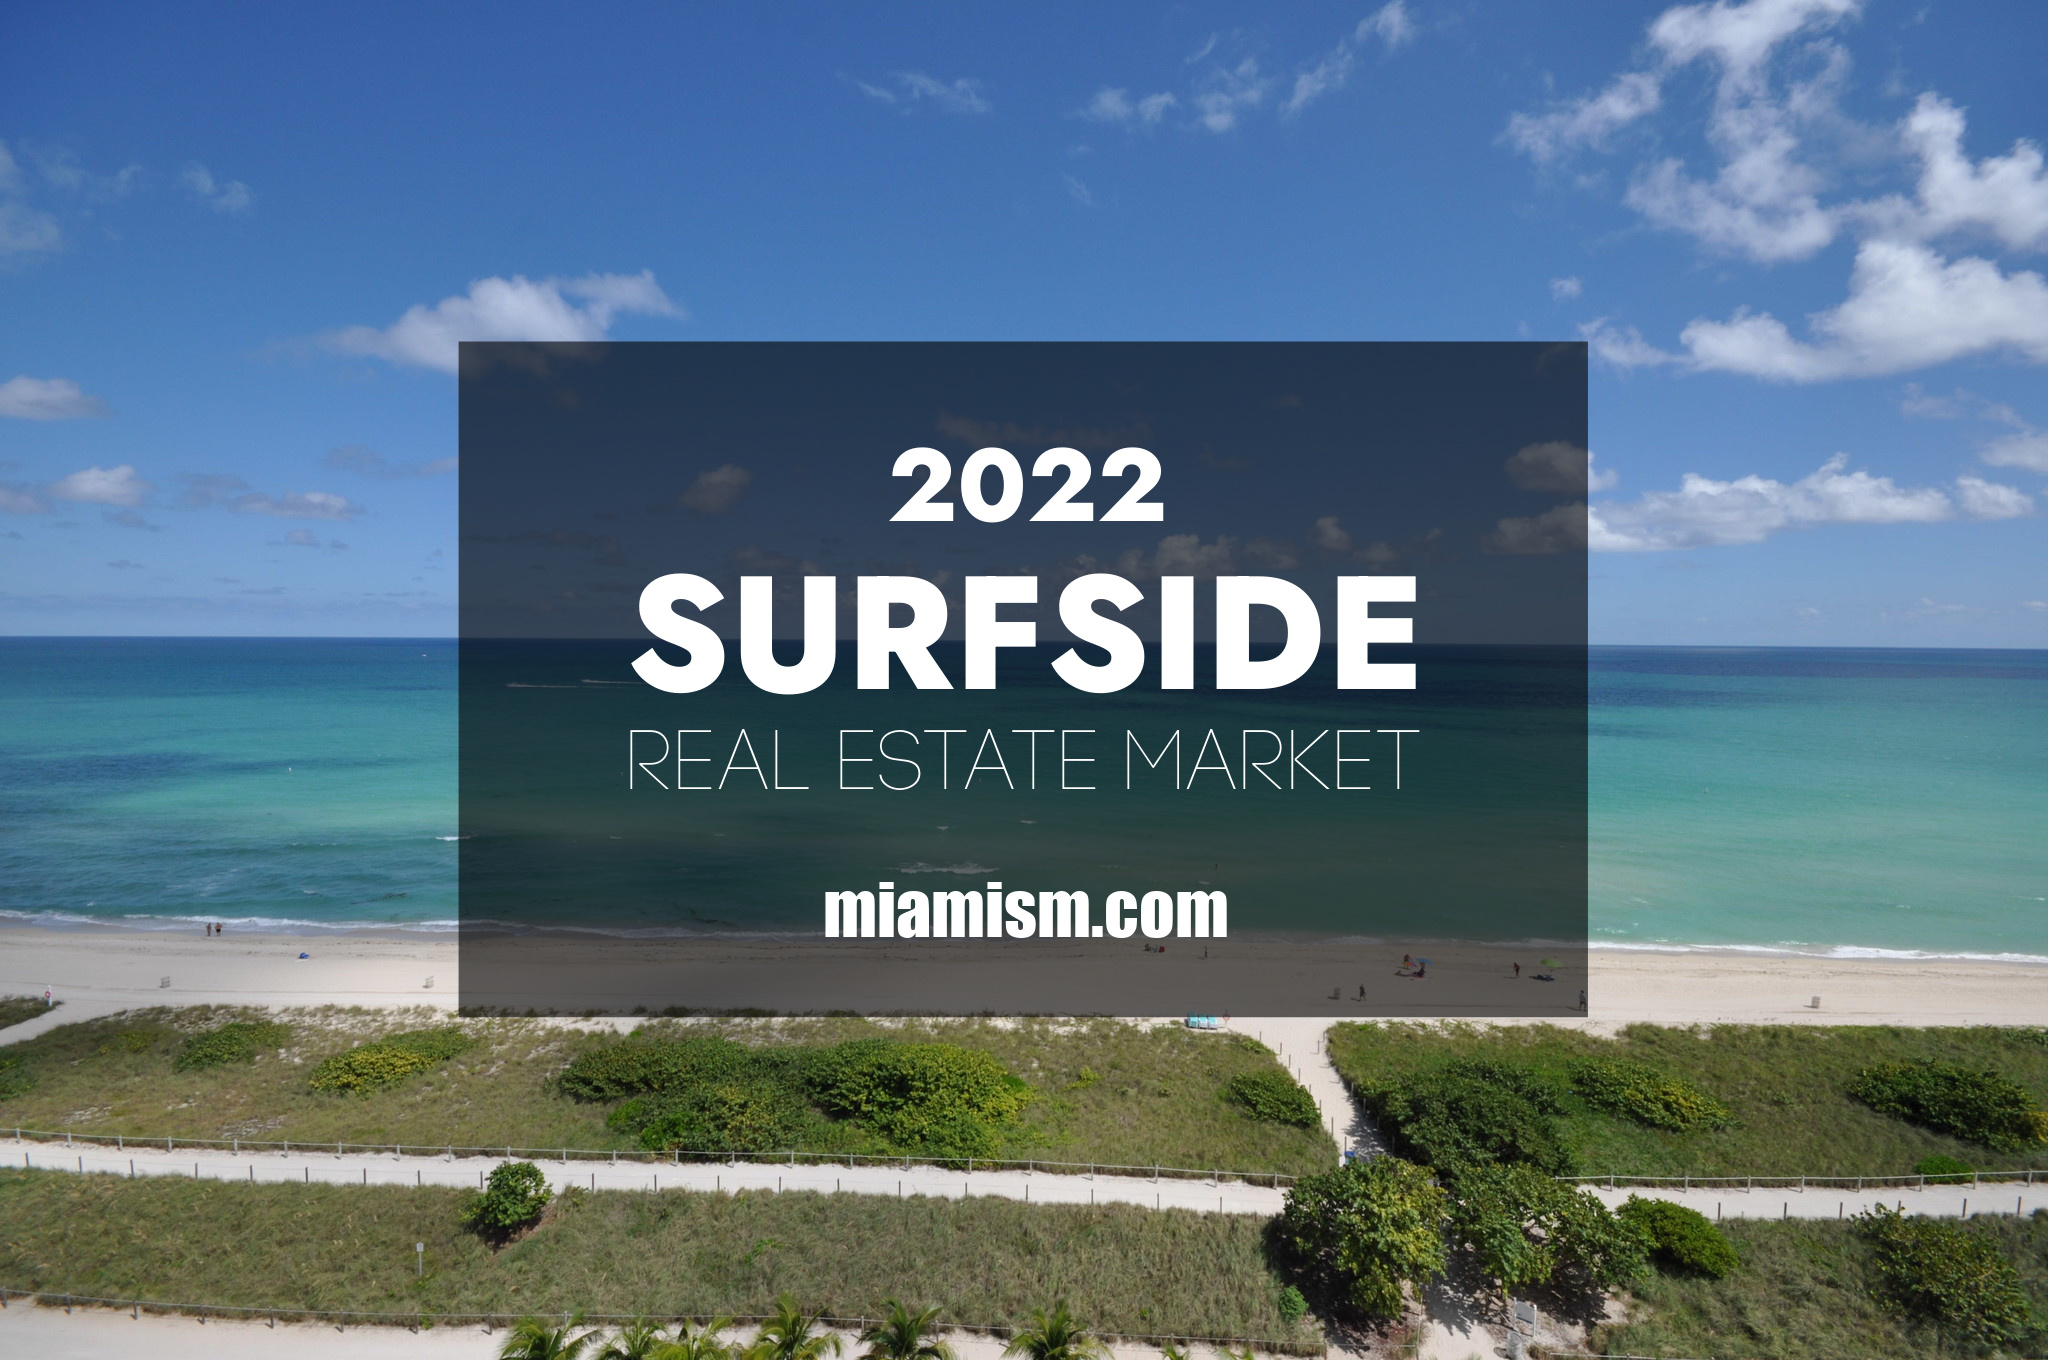 Surfside Market Report for 2022 by miamism